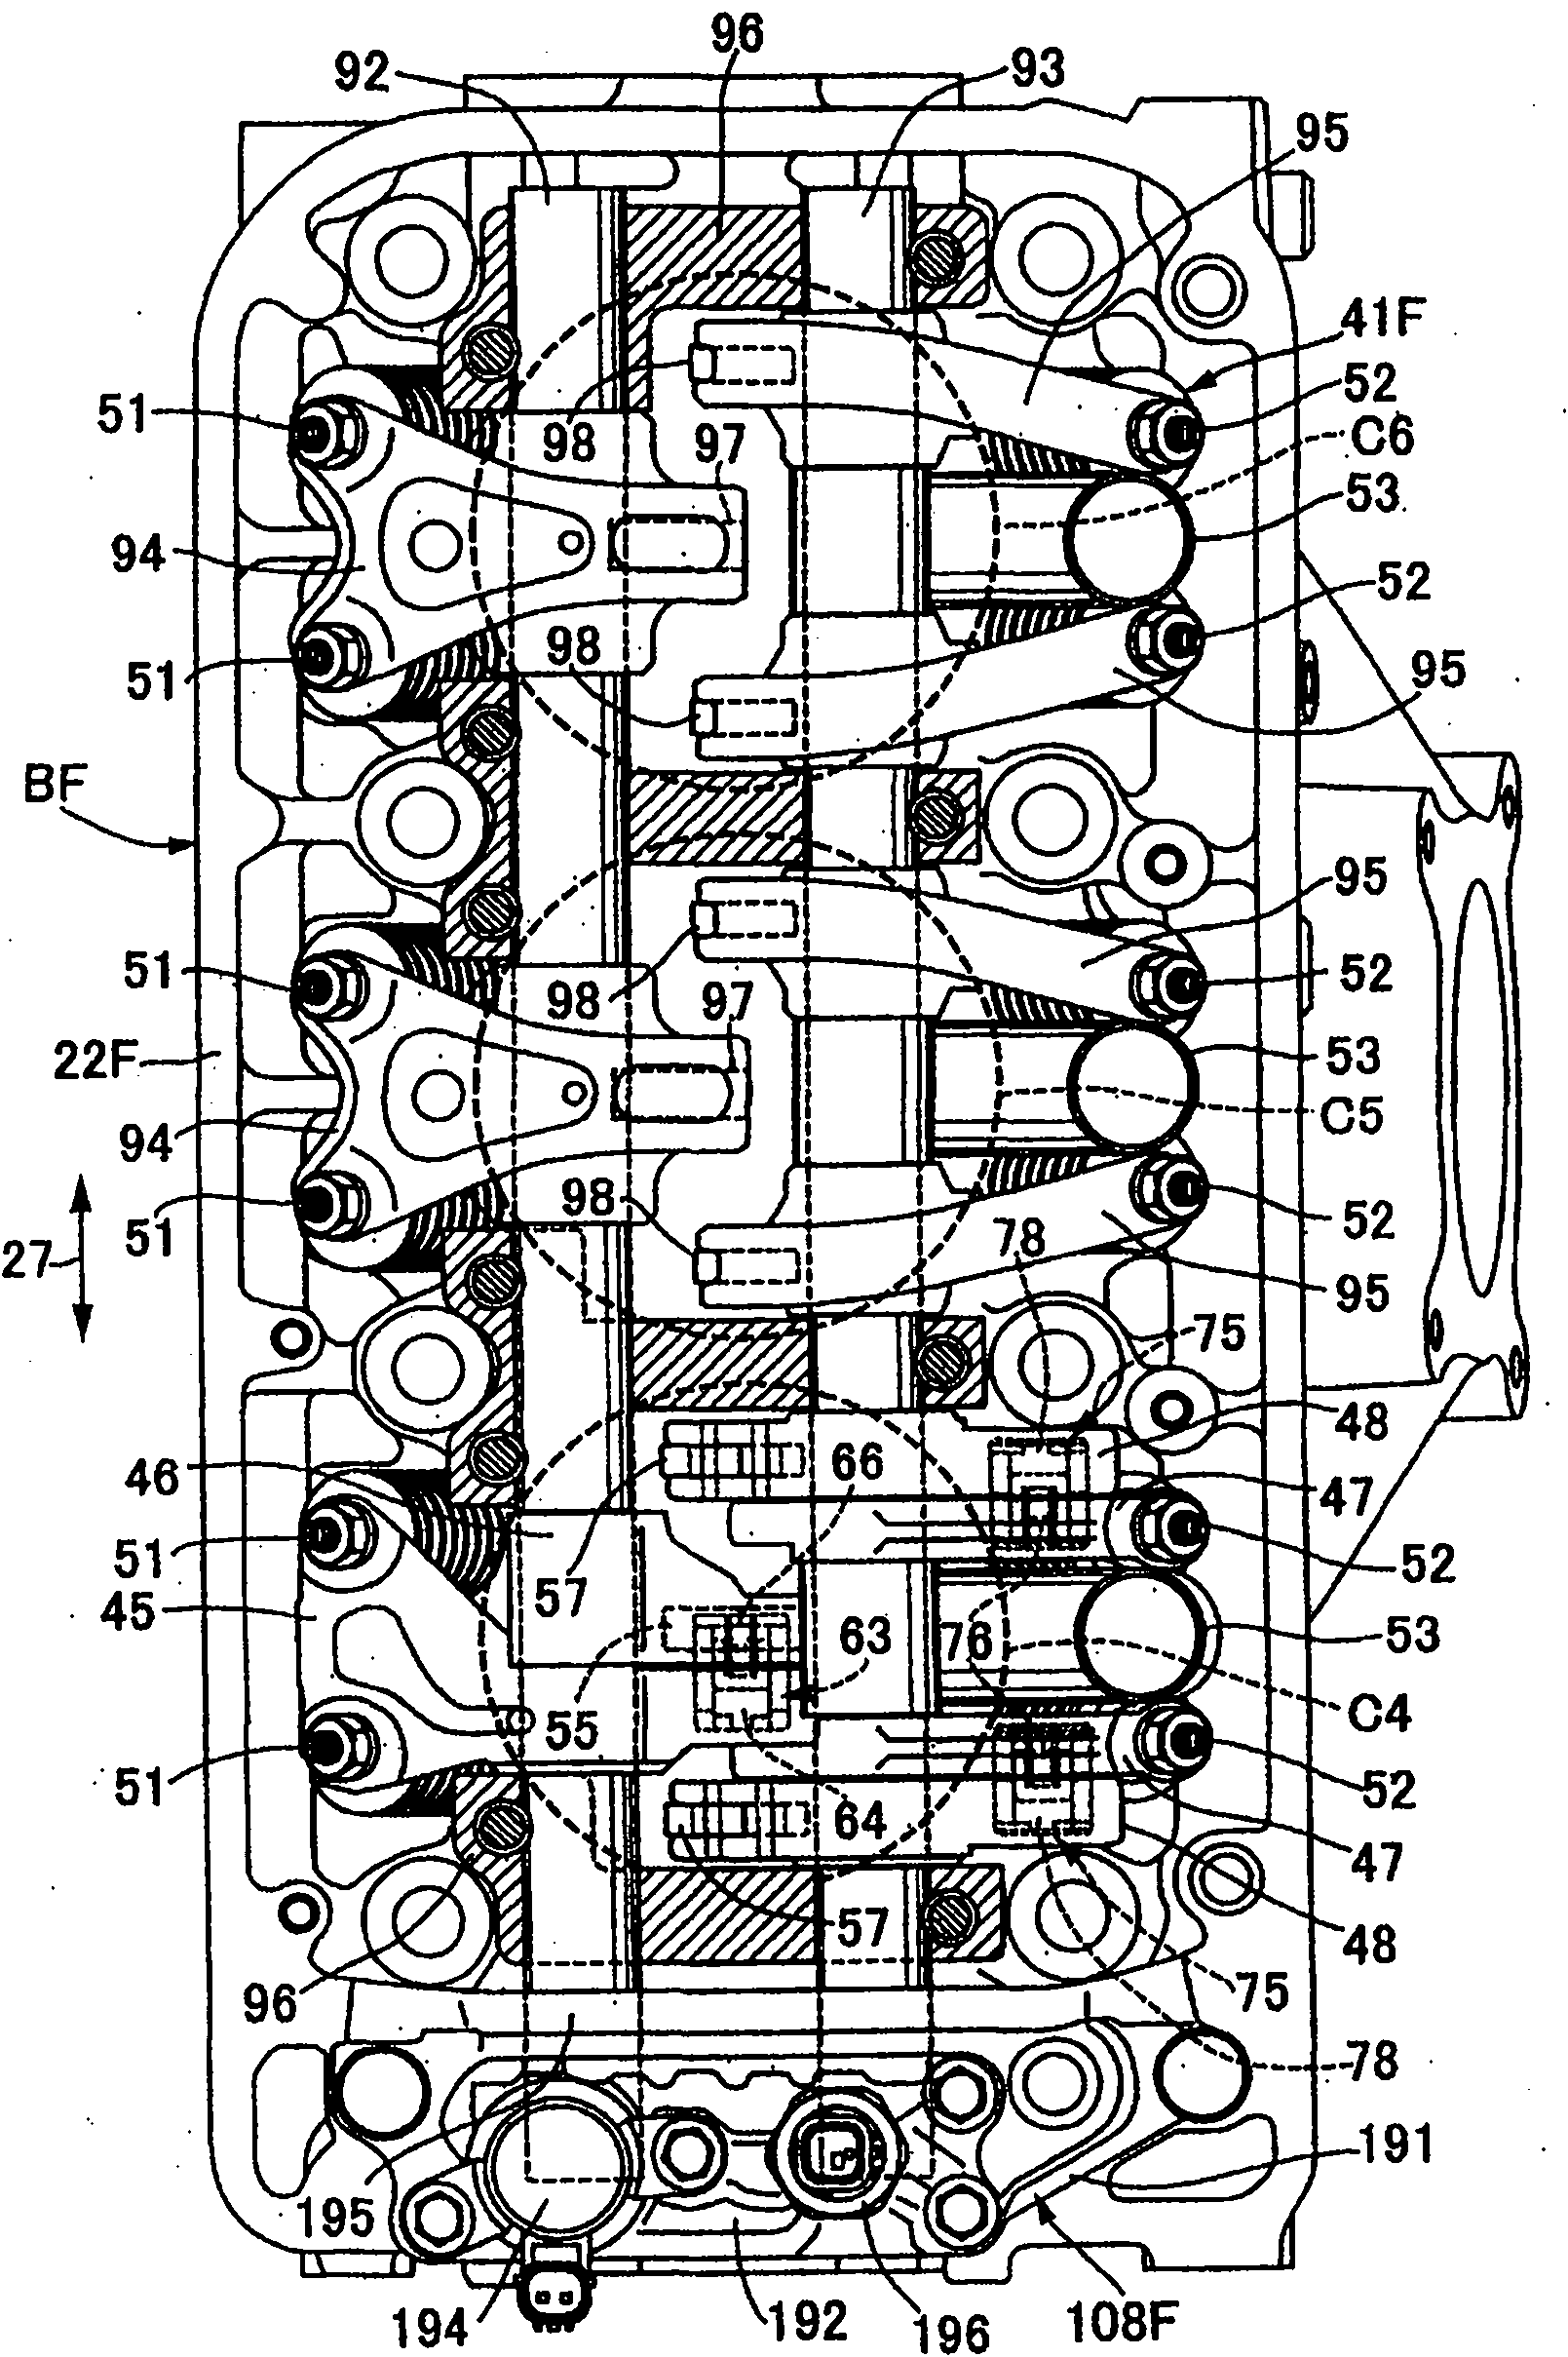 Valve gear control device for internal combustion engine